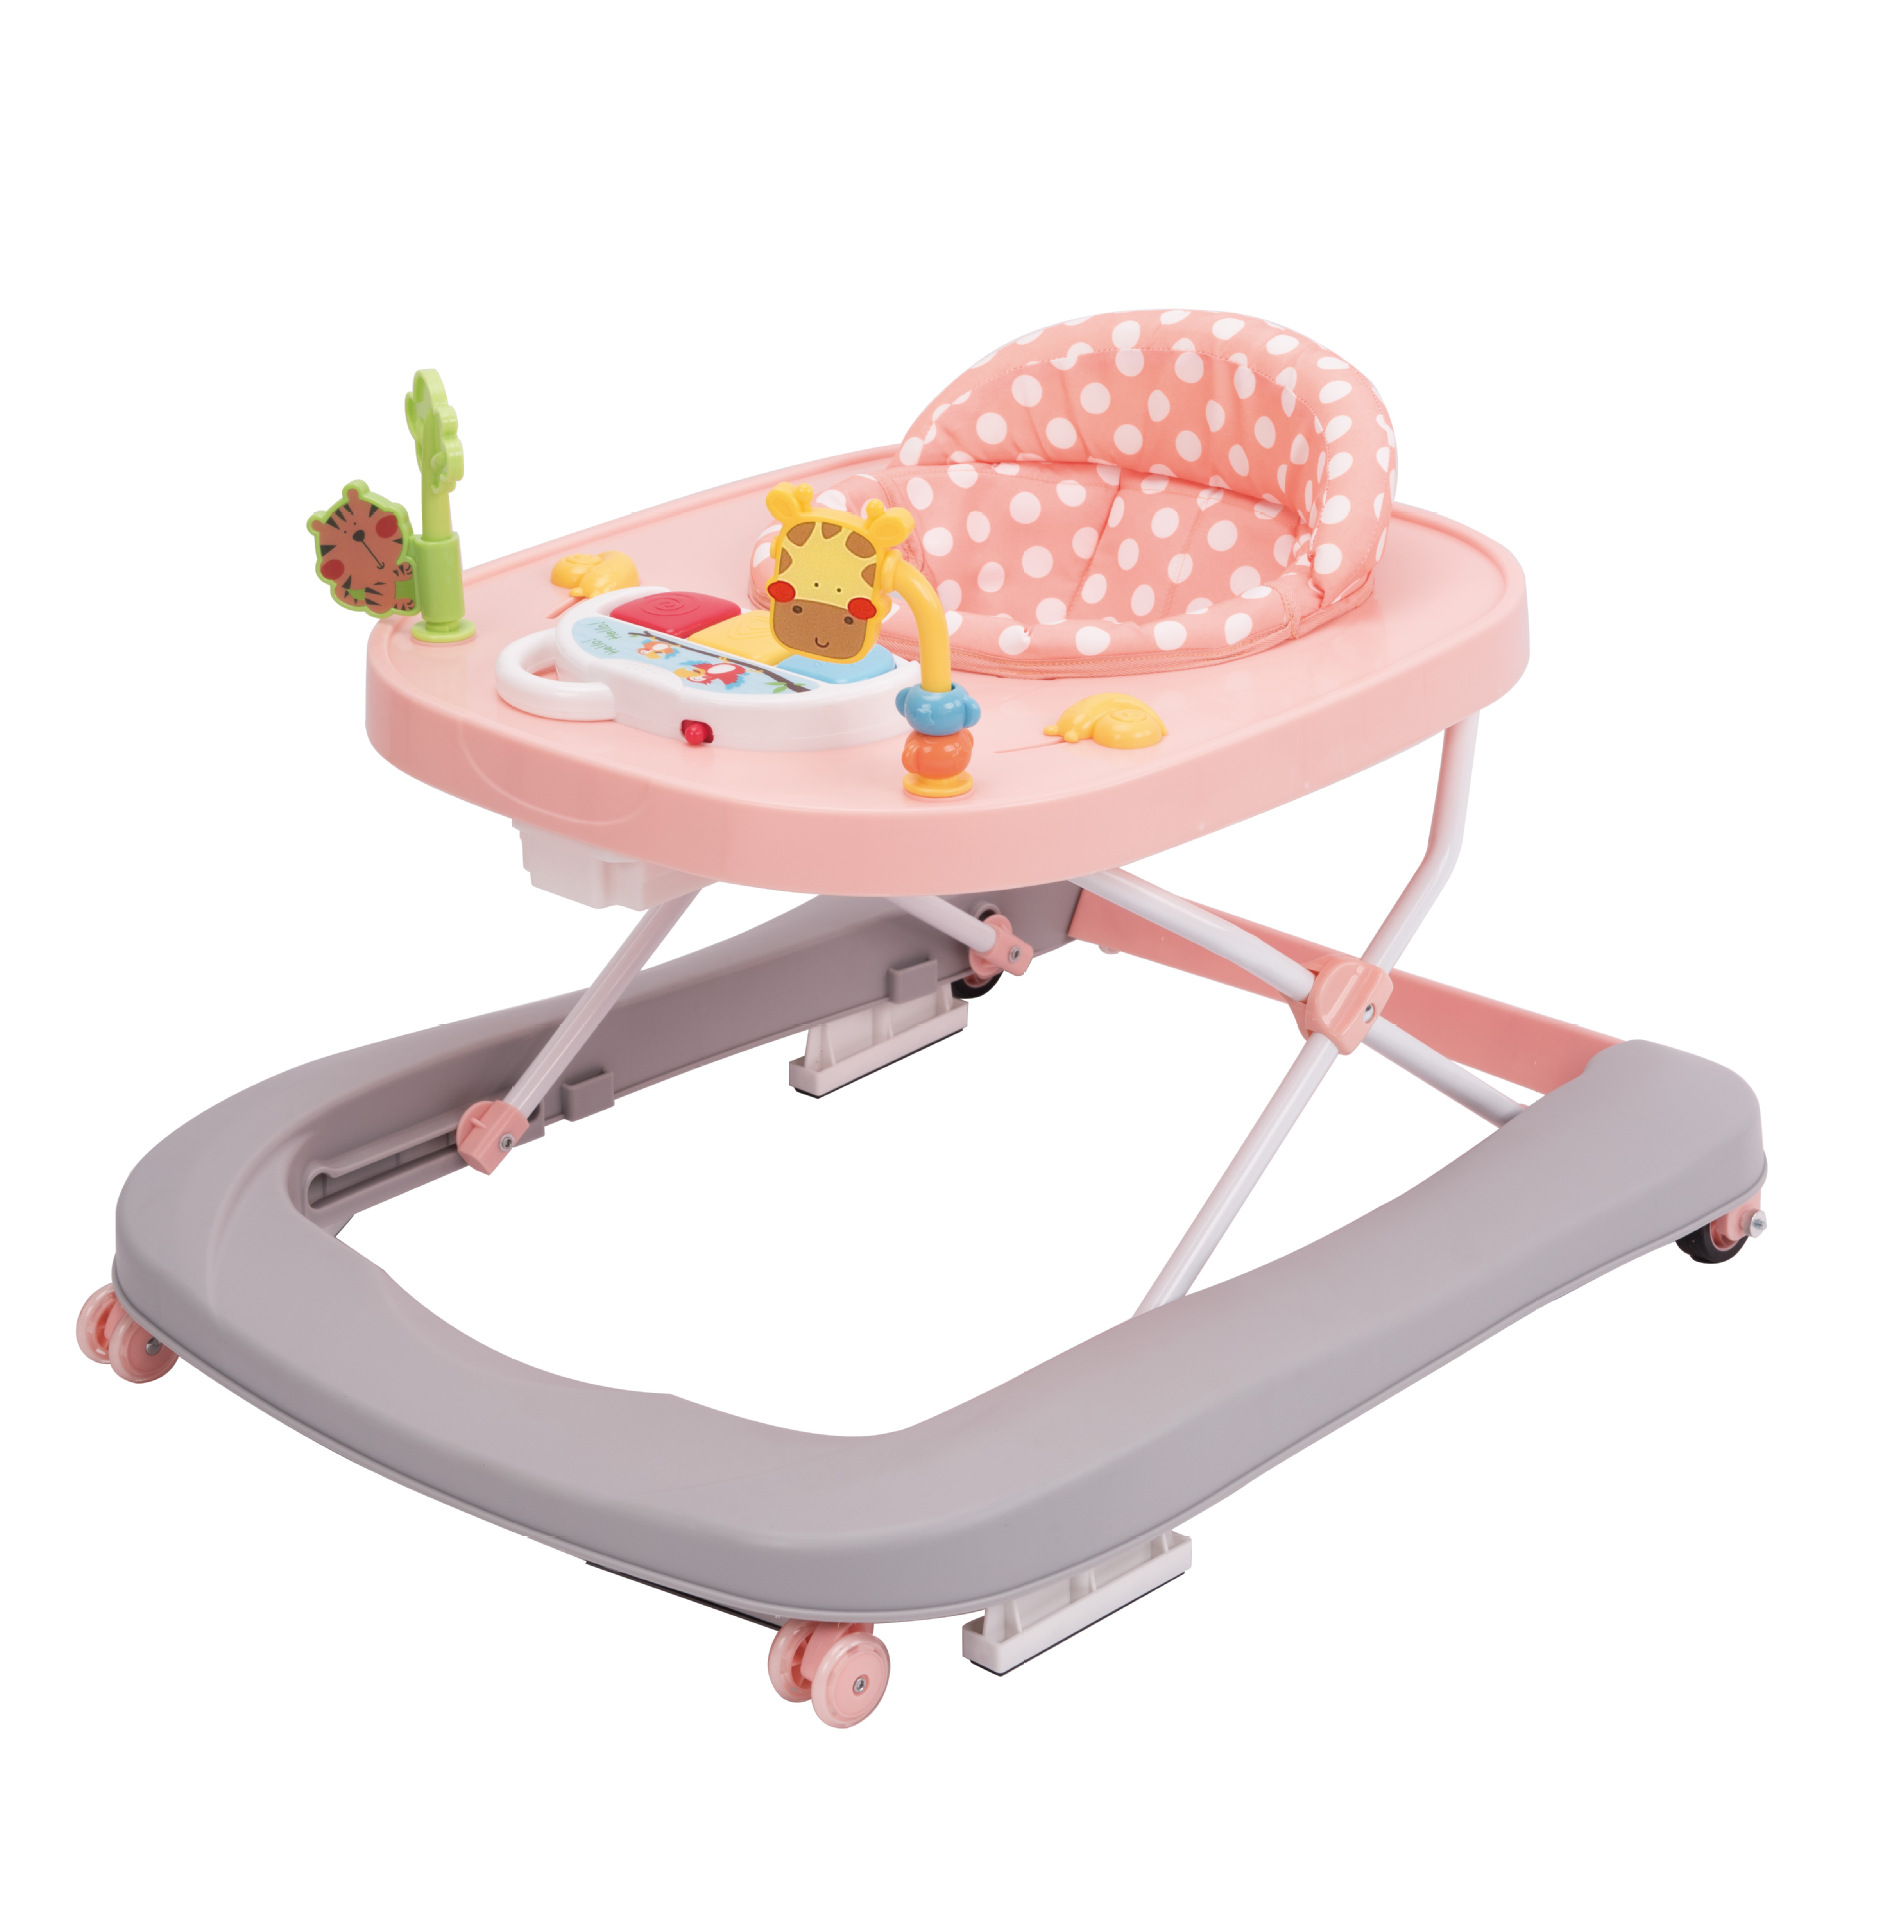 Three Levels of Height Adjustable Baby Walker with Multiple Functions